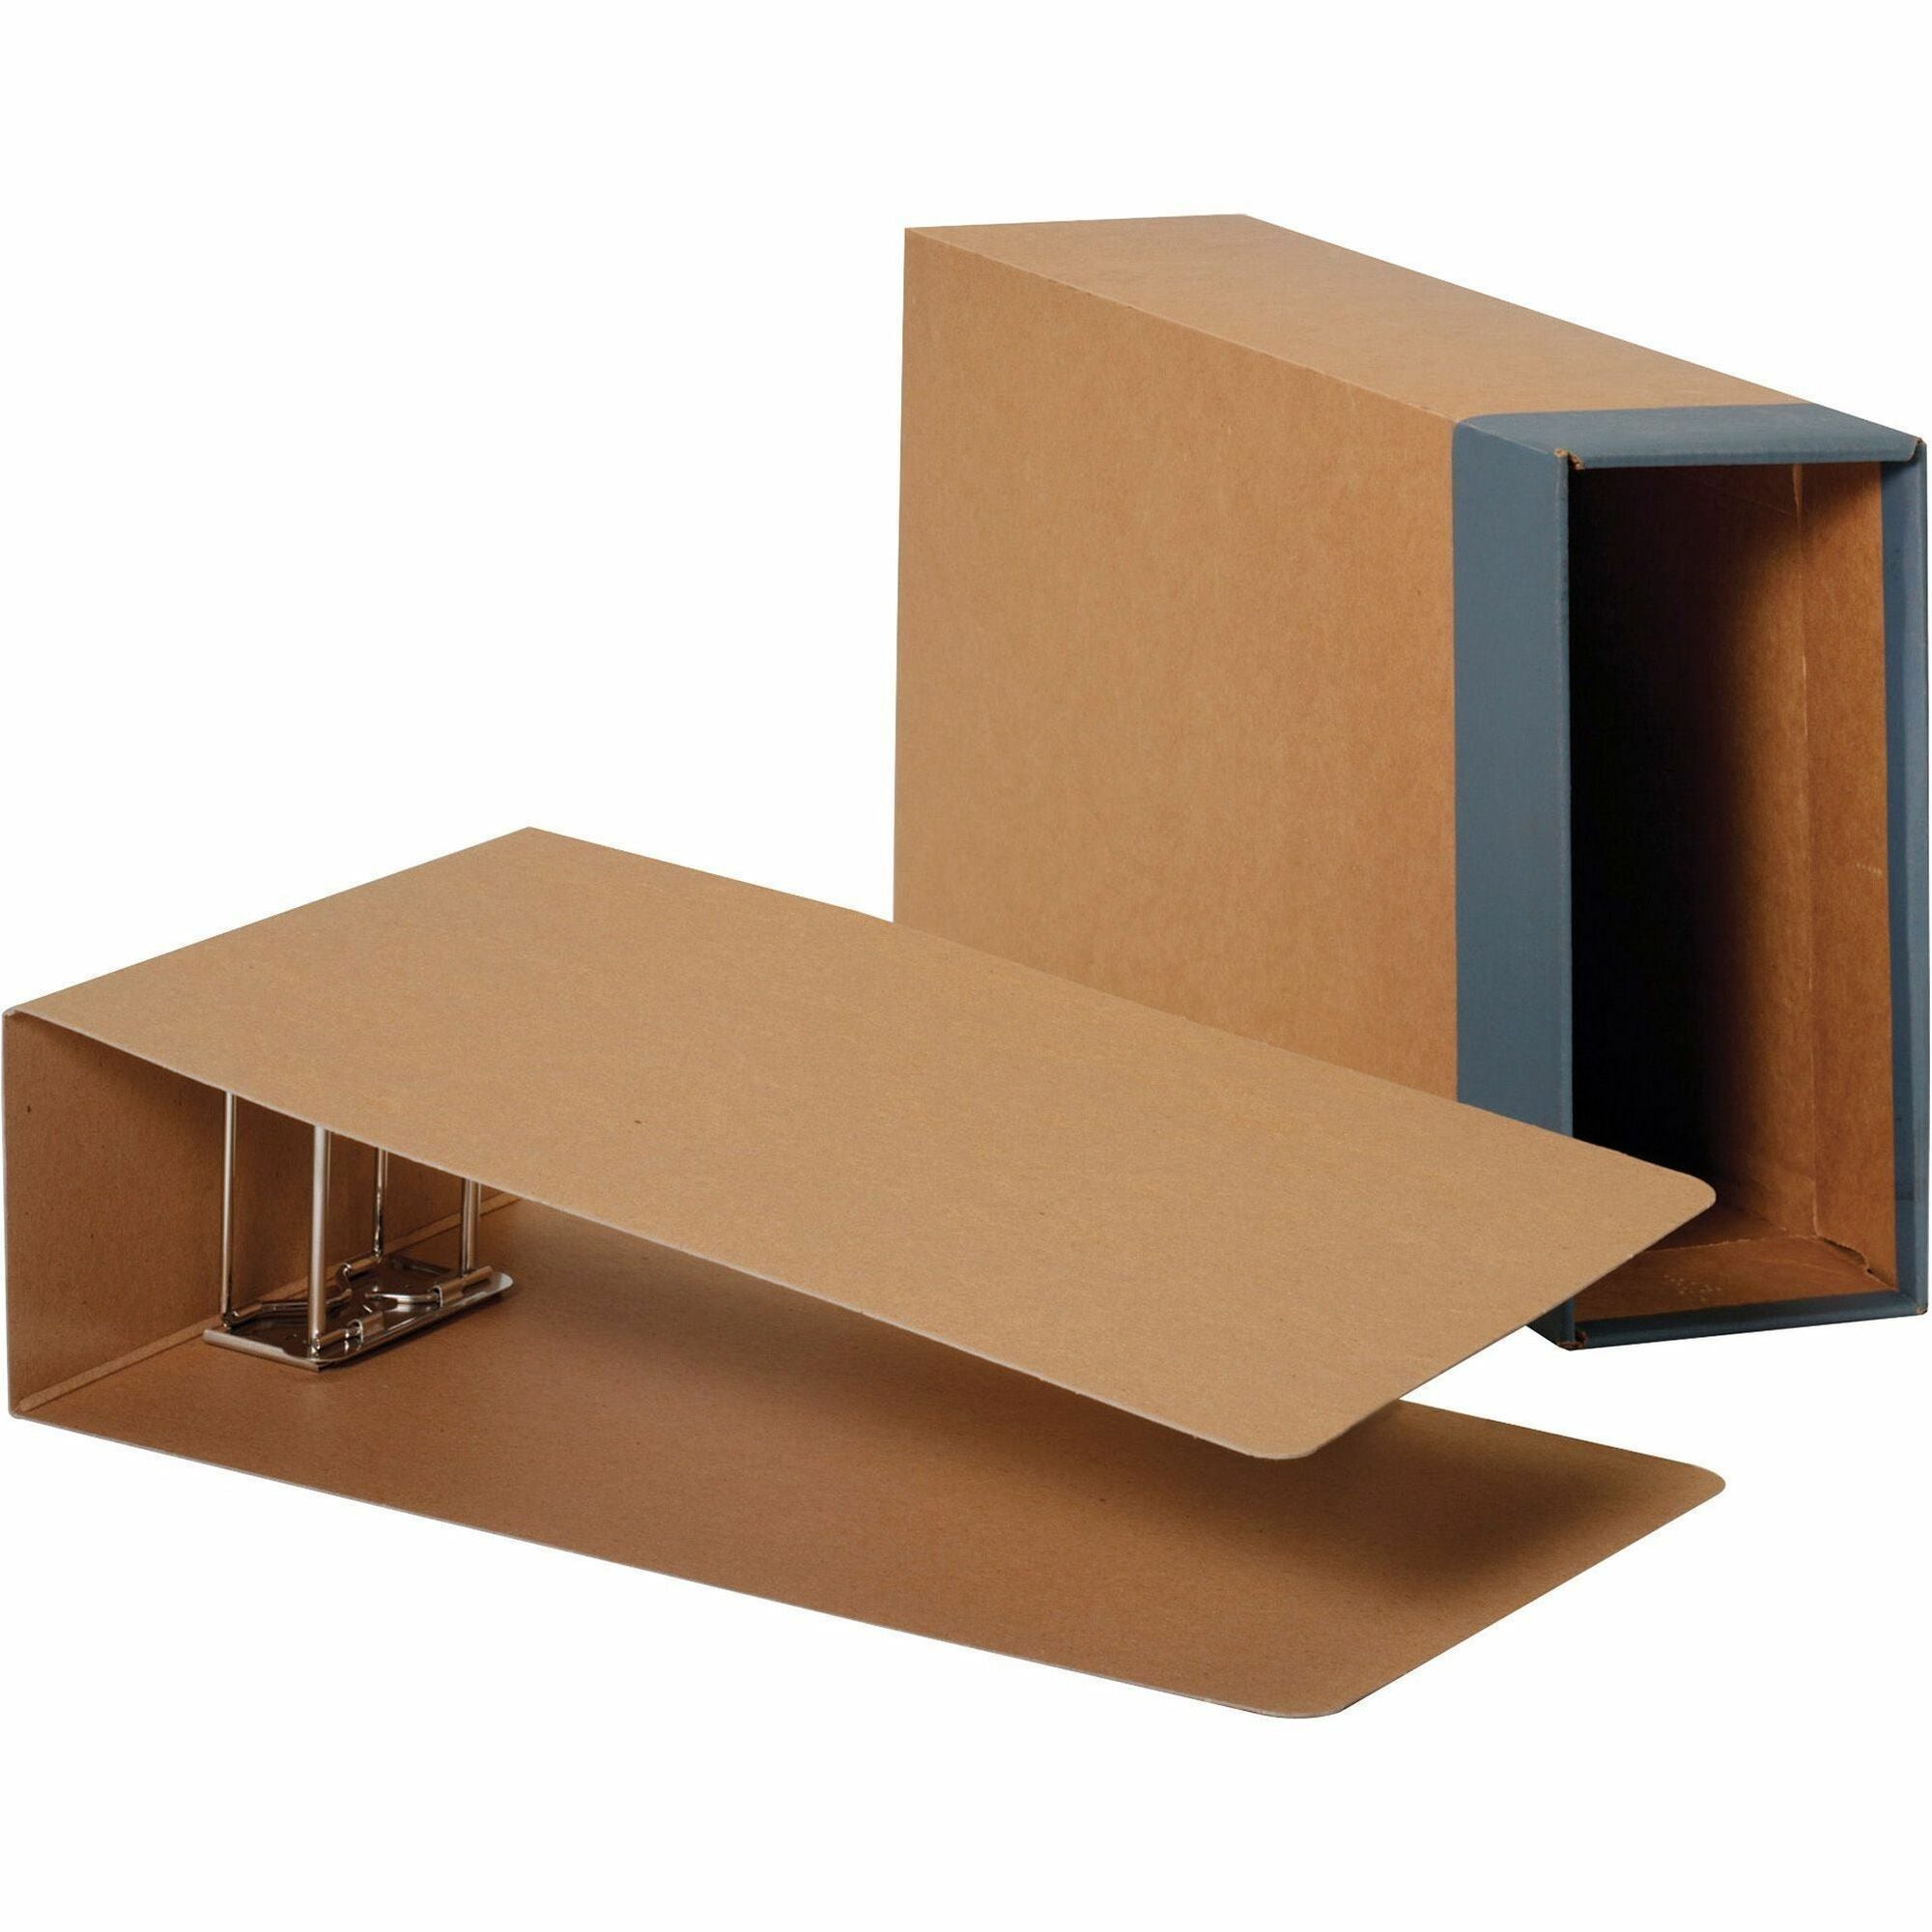 Pendaflex Columbia Binding Cases - External Dimensions: 9.5" Width x 15.9" Depth x 4.6"Height - Media Size Supported: Legal - Fiberboard, Kraft - Brown - For Document - Recycled - 1 Each - 